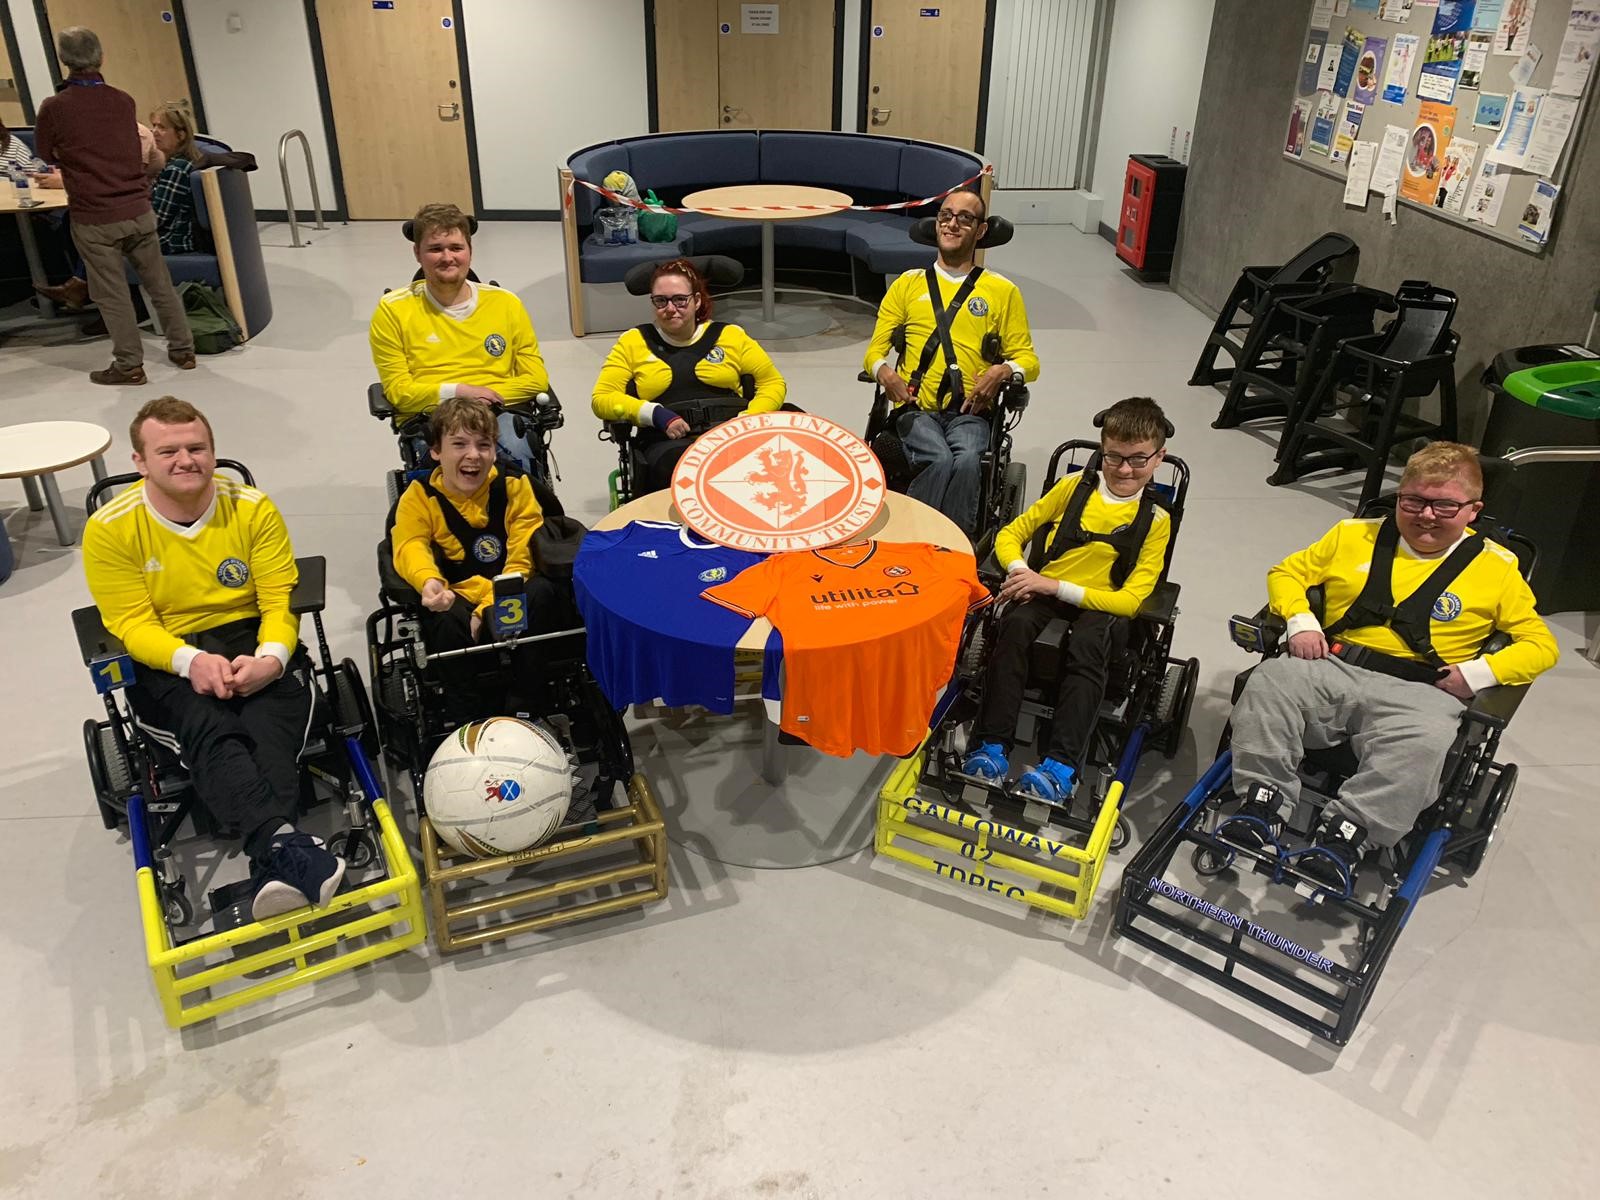 Tayside Dynamos members front row (from left): Nicky Duncan, Alexander Johnstone, Eythan Galloway, Logan Mitchelson. Back row: Kein Speed, Kristin MacMaster, Liam Ritchie.